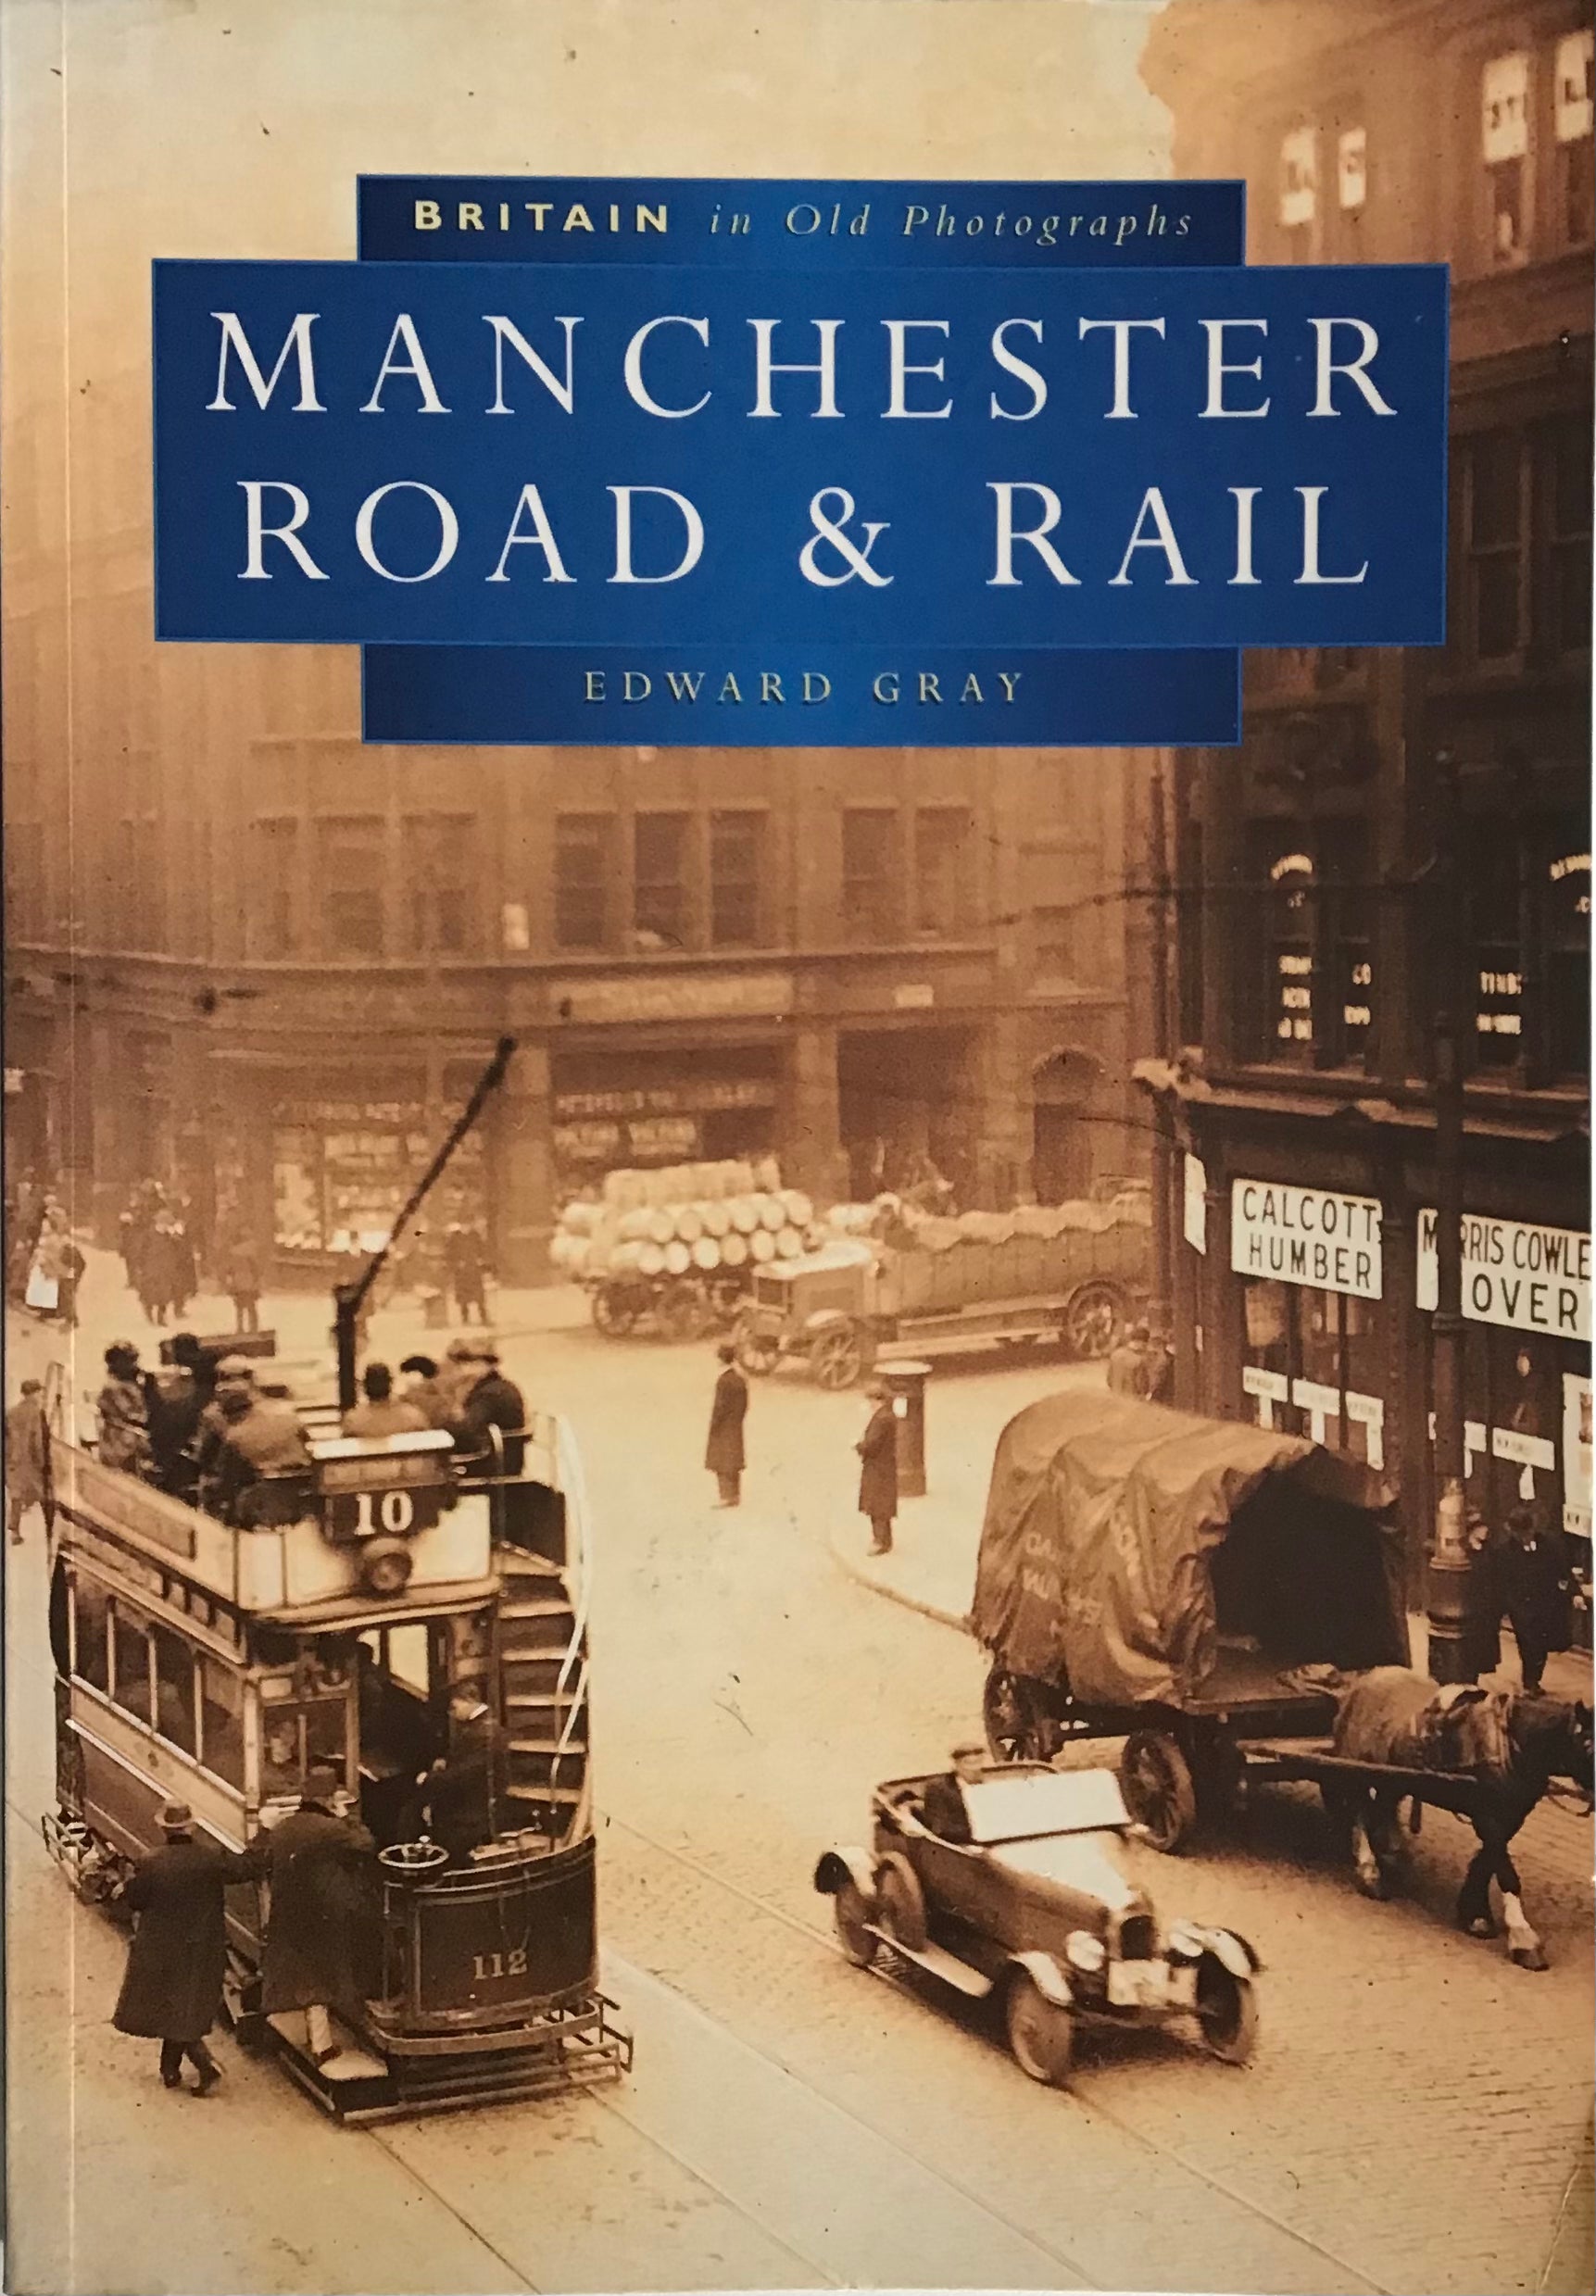 Britain in Old Photographs: Manchester Road & Rail - Edward Gray - Chester Model Centre